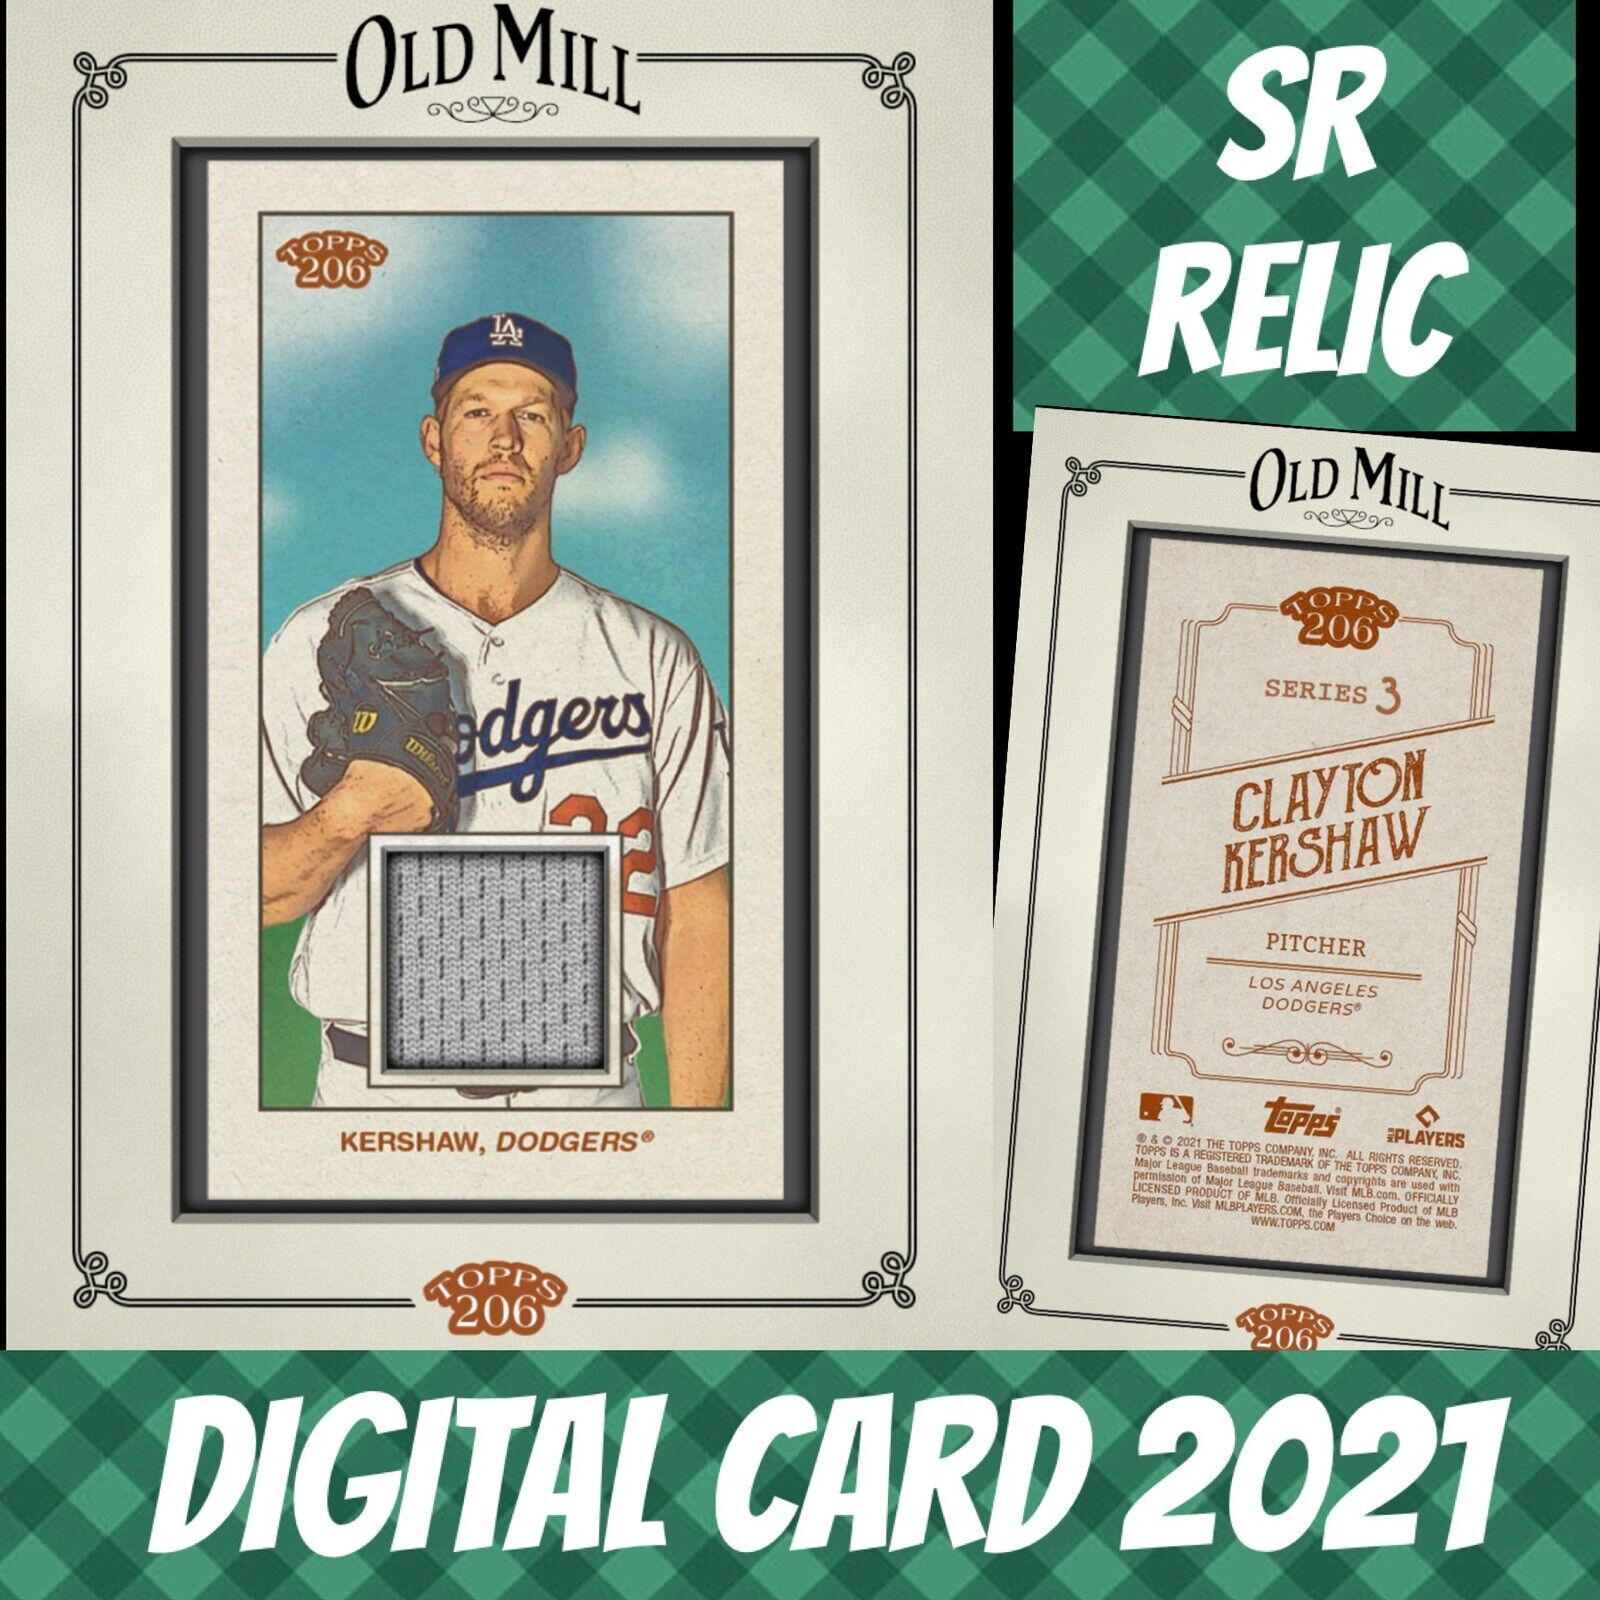 2021 Topps Colorful 21 Clayton Kershaw Topps 206 S/3 Framed Relic Digital Card